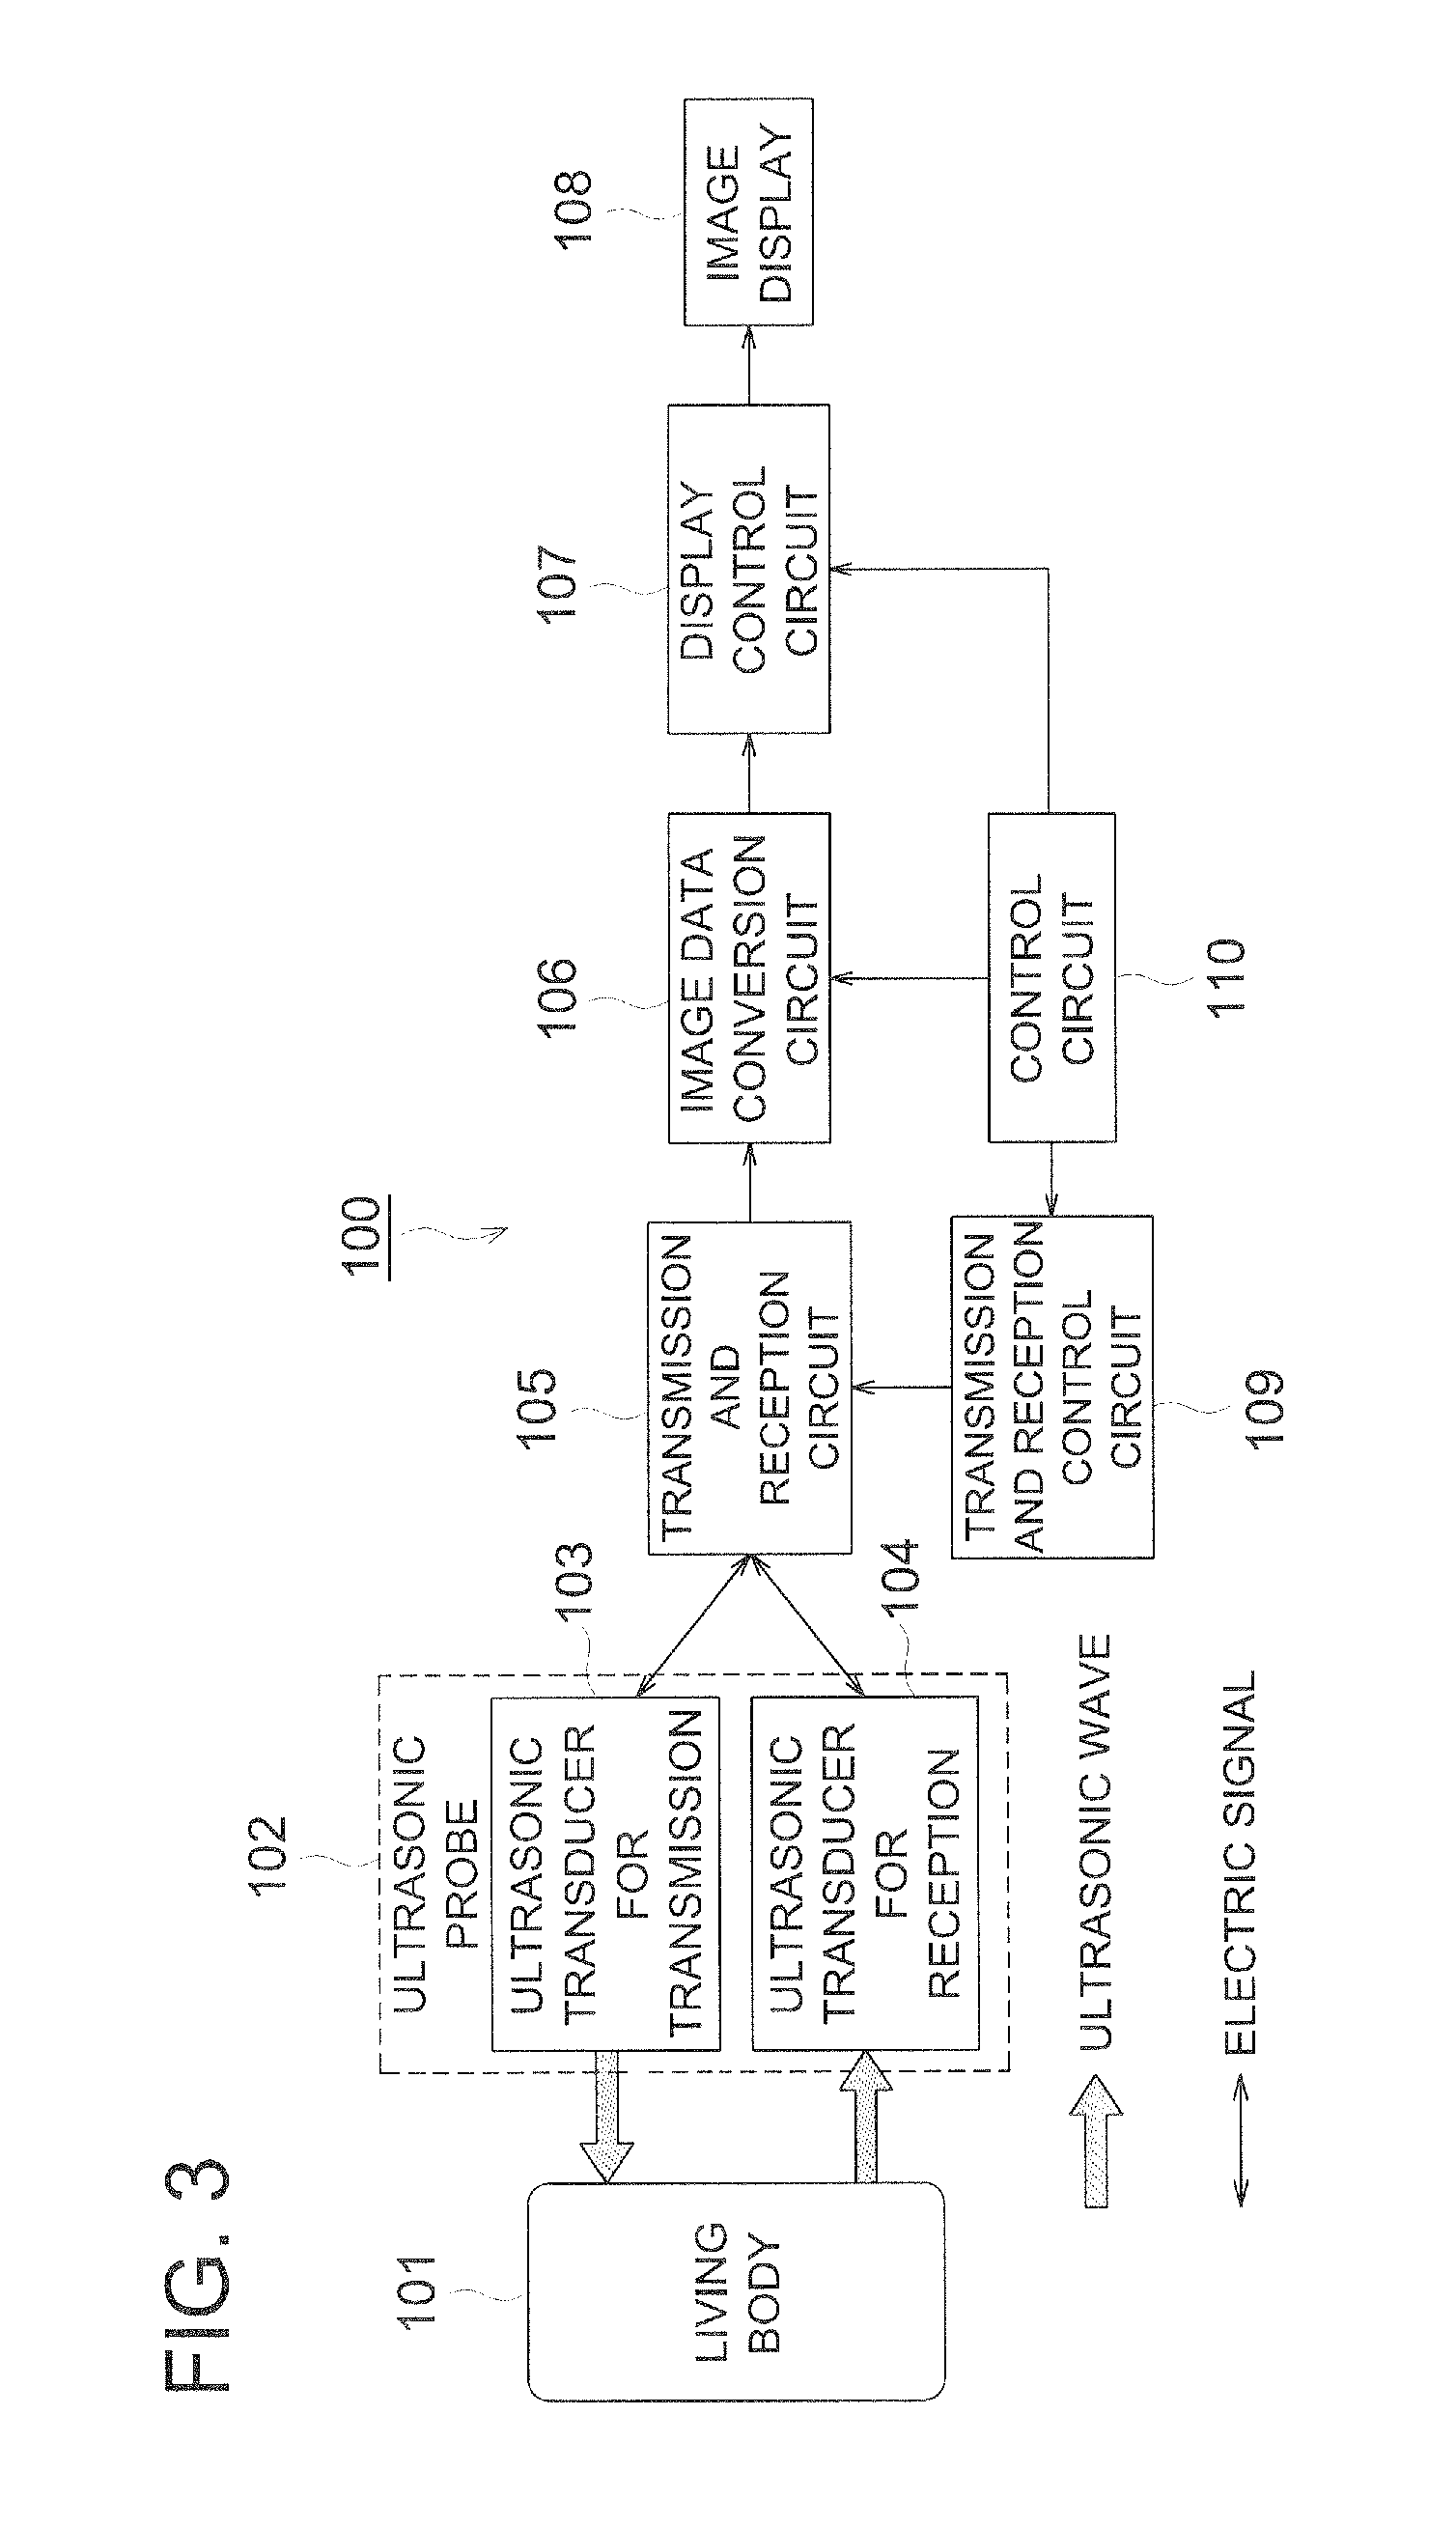 Organic piezoelectric material, ultrasound transducer, ultrasound probe, and ultrasound medical diagnostic imaging system